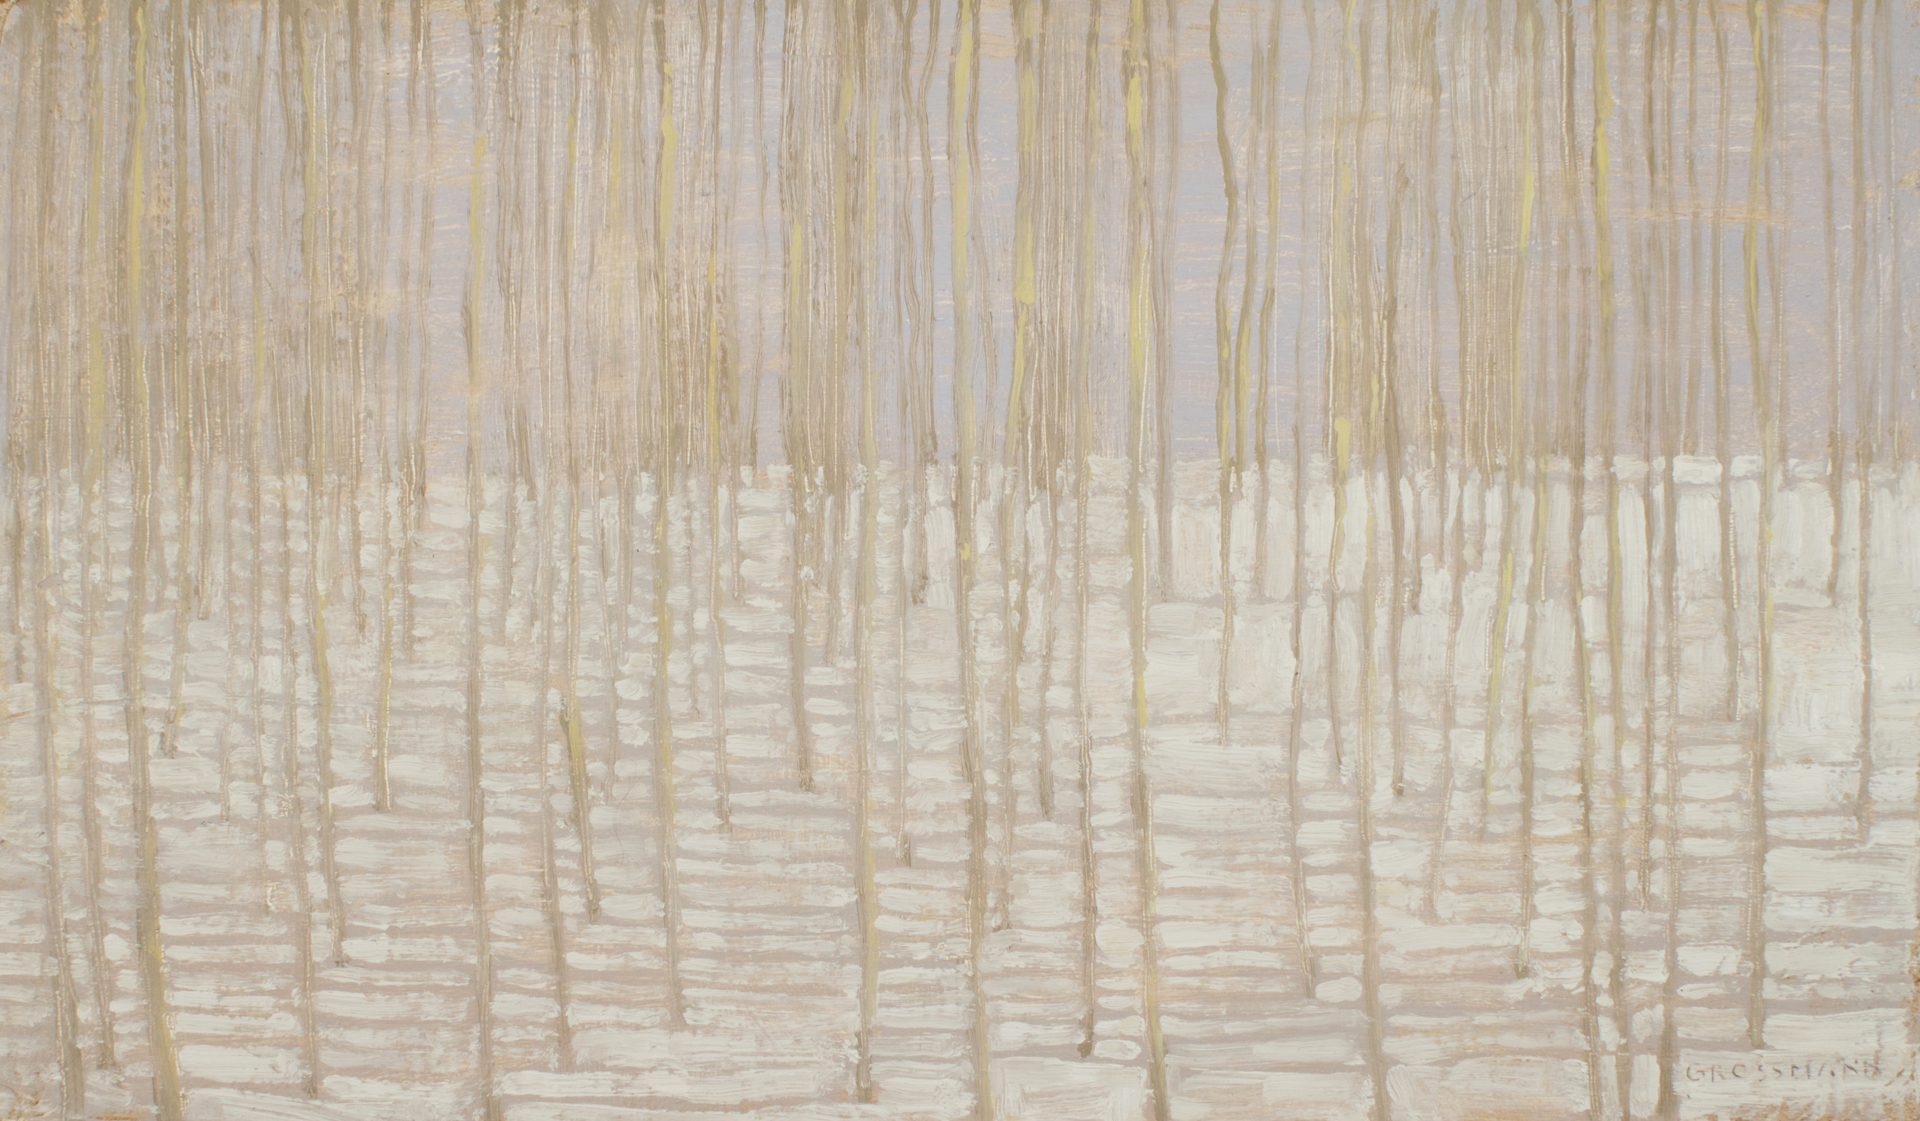 Winter Forest with Shadow Lines by David Grossmann